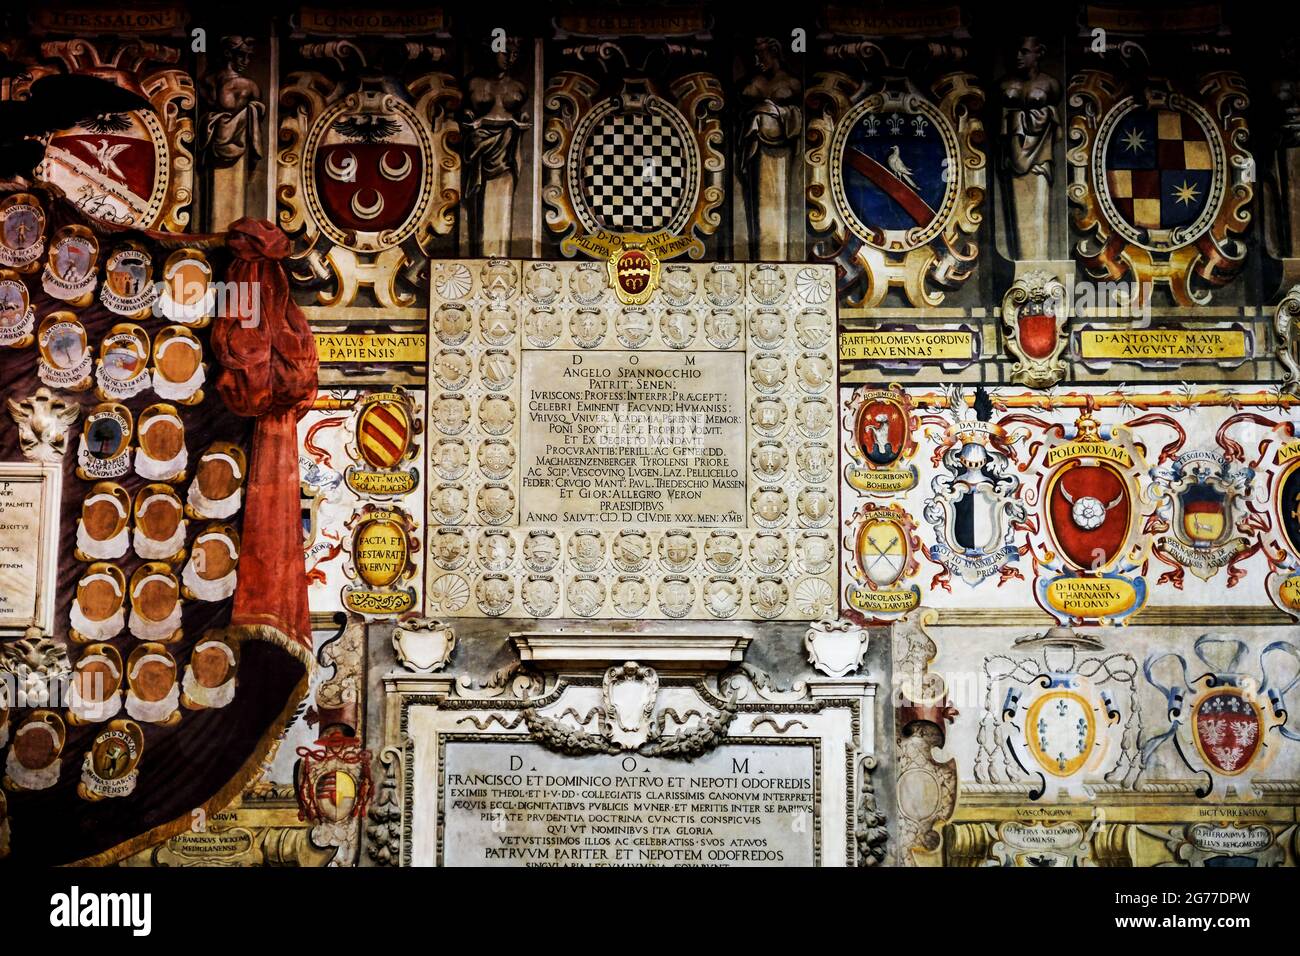 Coats of Arms of former students on the wall of Bologna University in Italy Stock Photo